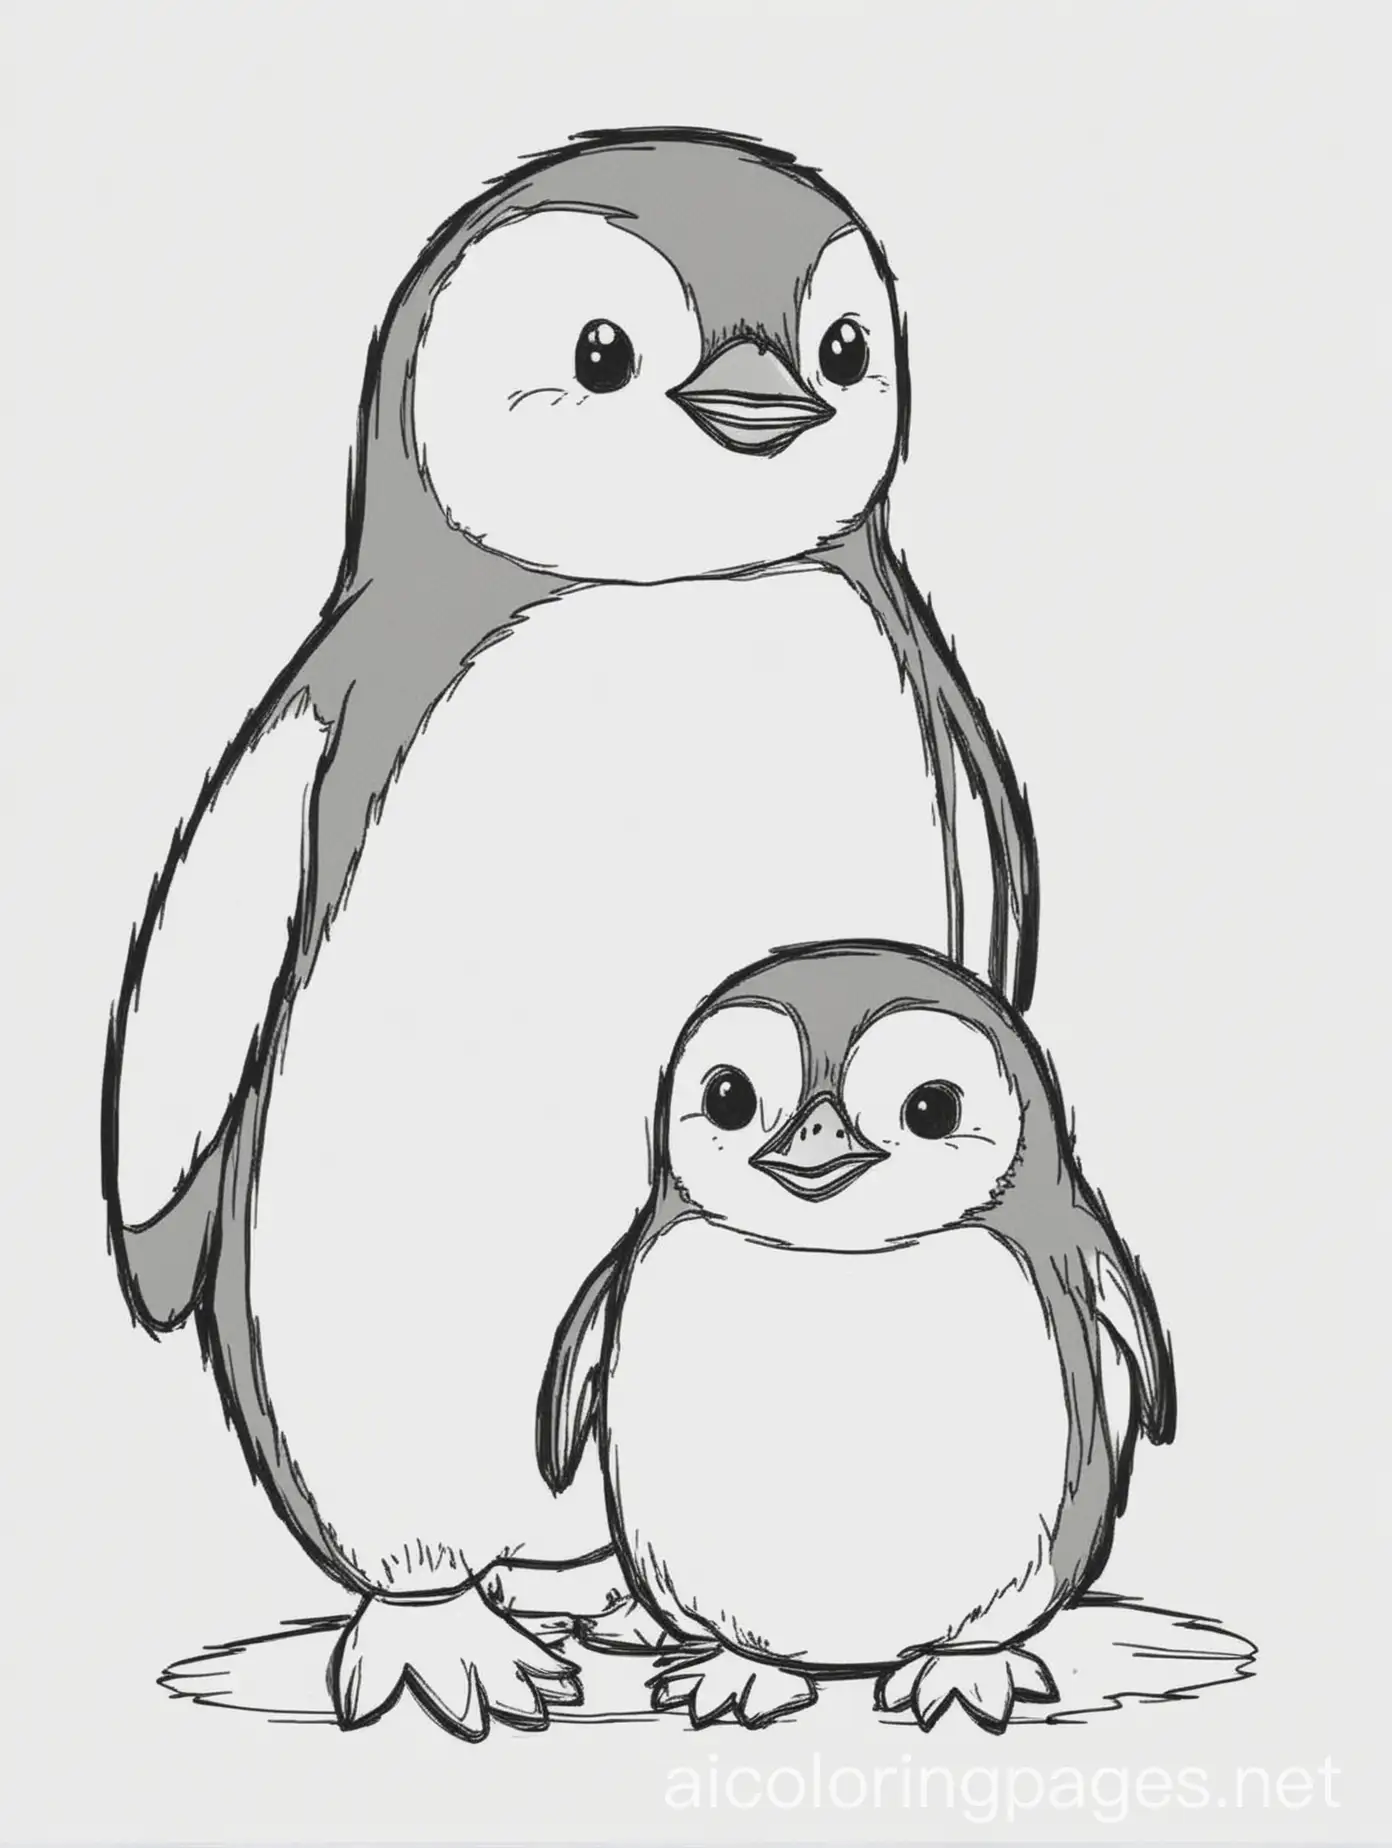 cute Penguin with his baby for kids easy to coloring , Coloring Page, black and white, line art, white background, Simplicity, Ample White Space. The background of the coloring page is plain white to make it easy for young children to color within the lines. The outlines of all the subjects are easy to distinguish, making it simple for kids to color without too much difficulty, Coloring Page, black and white, line art, white background, Simplicity, Ample White Space. The background of the coloring page is plain white to make it easy for young children to color within the lines. The outlines of all the subjects are easy to distinguish, making it simple for kids to color without too much difficulty